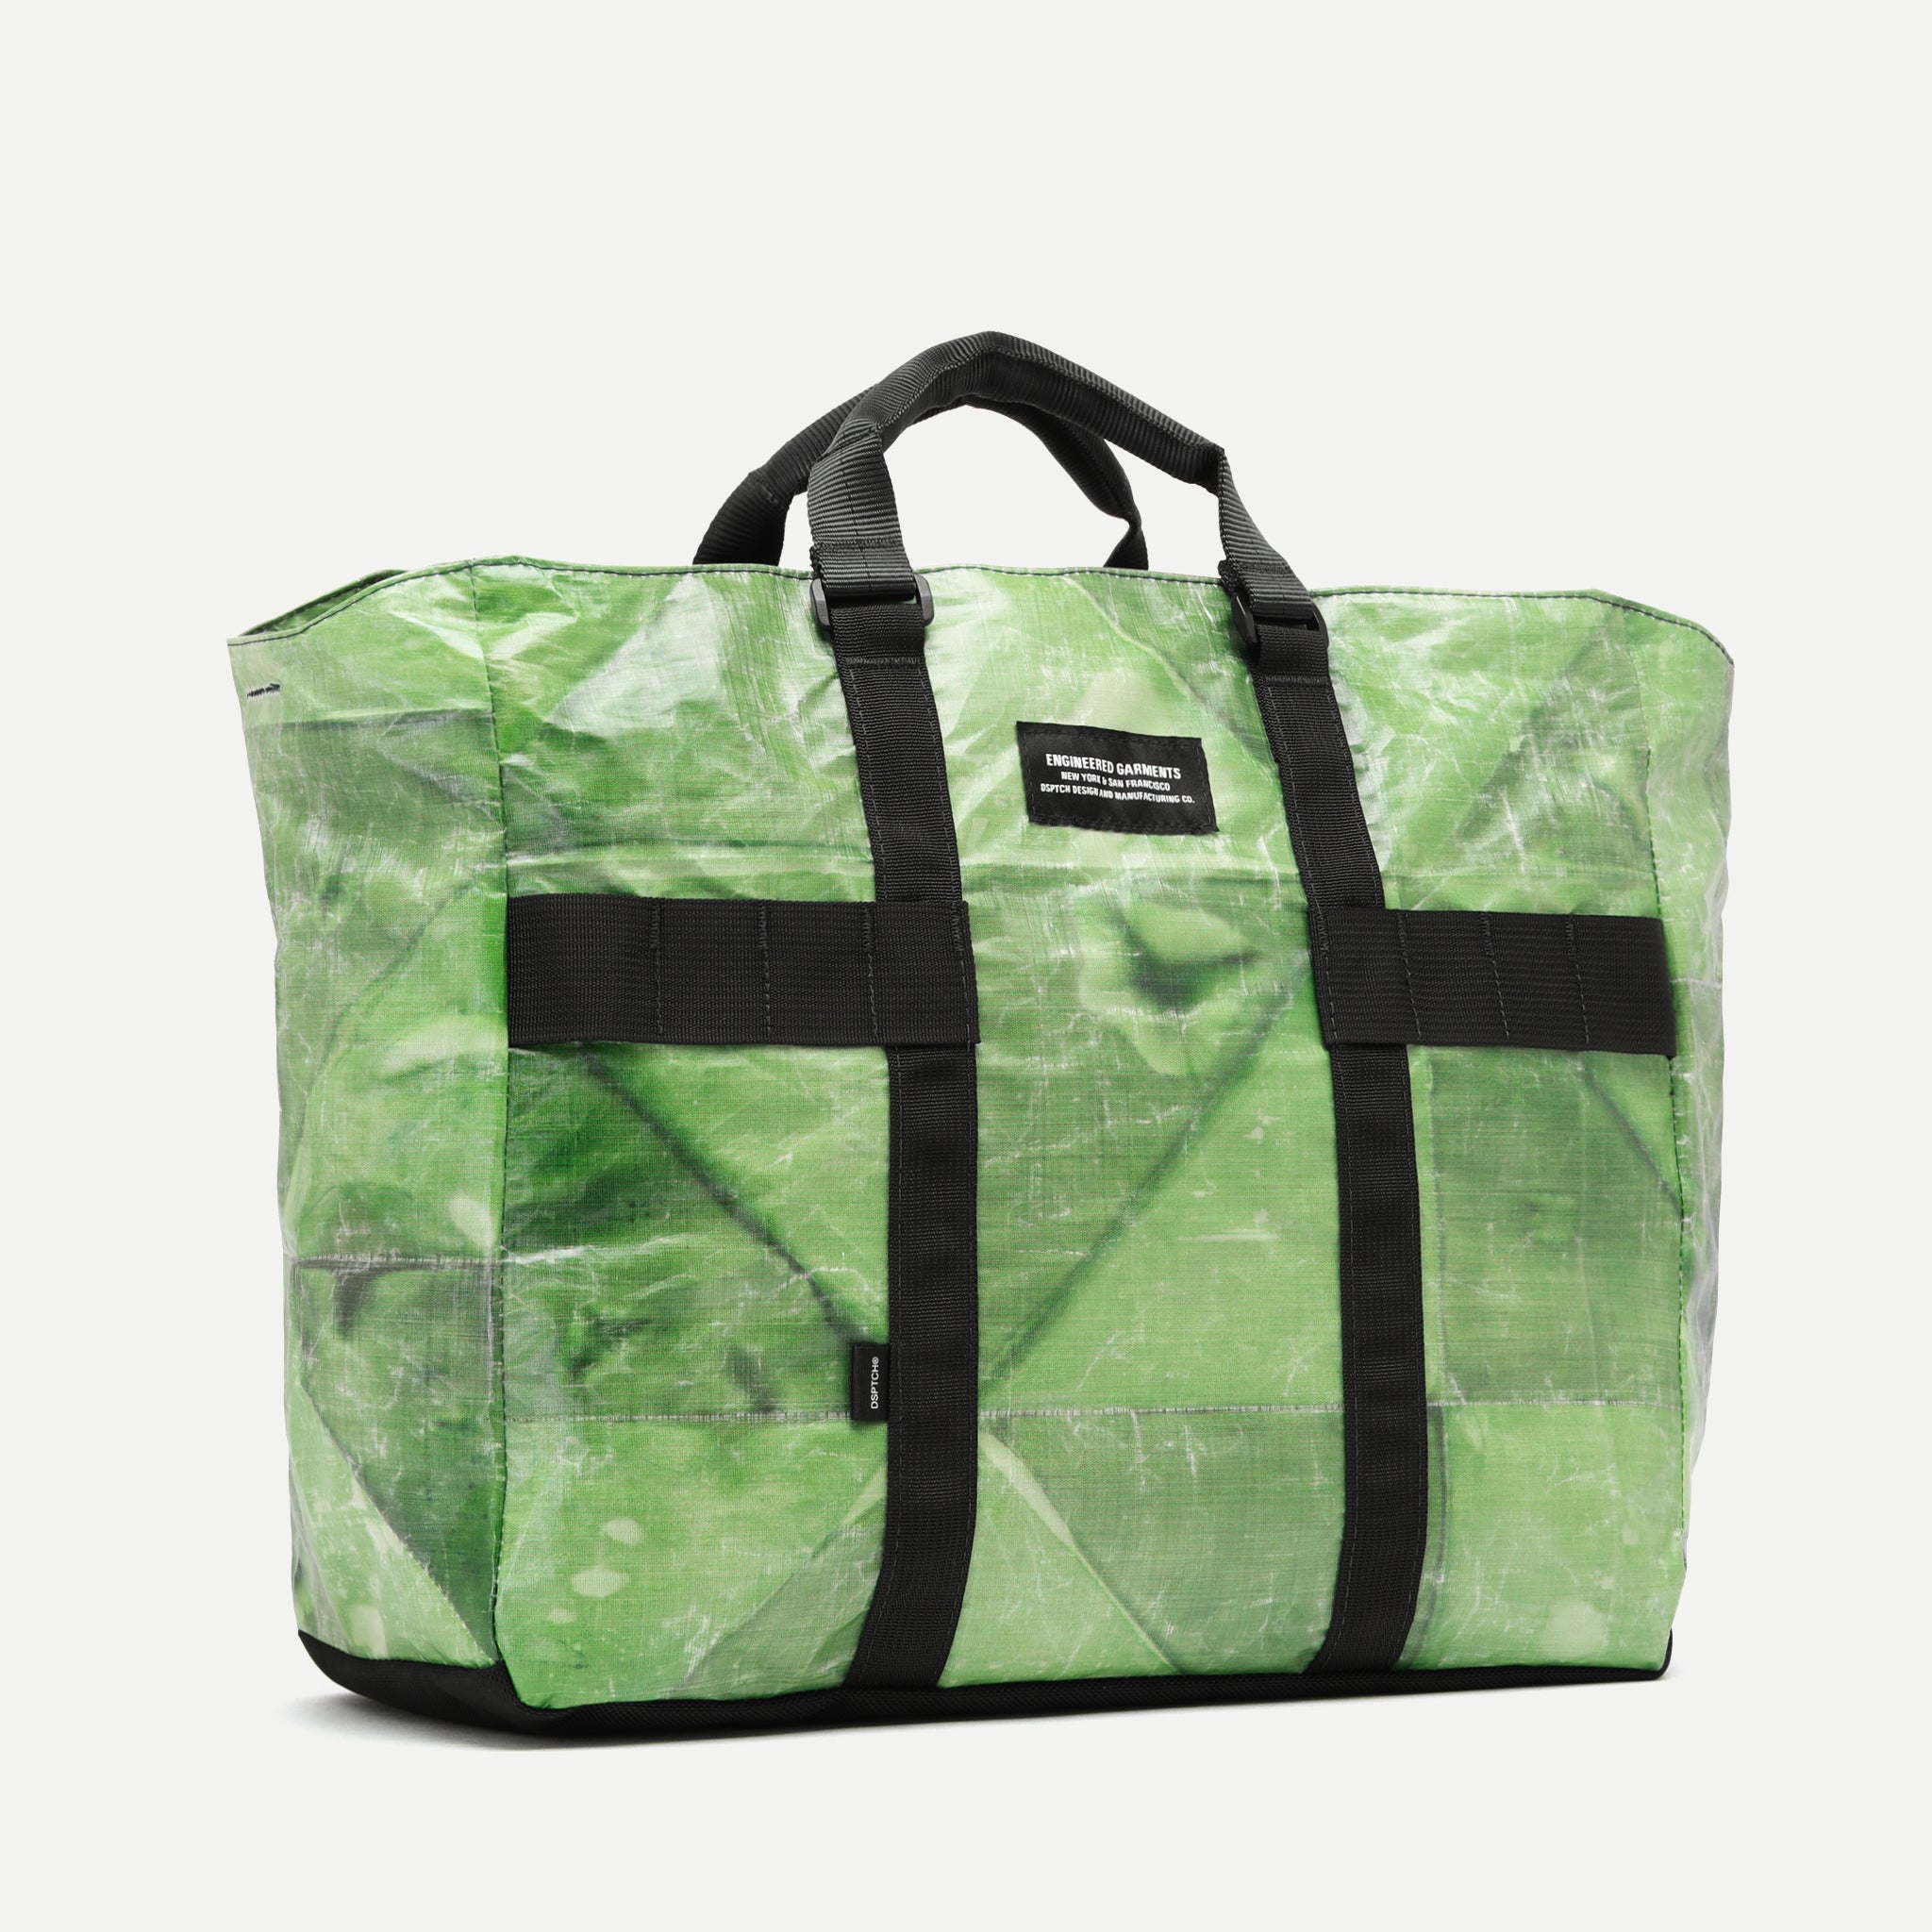 Utility Tote - Landscape - Engineered Garments Special Edition - Dyed Dyneema